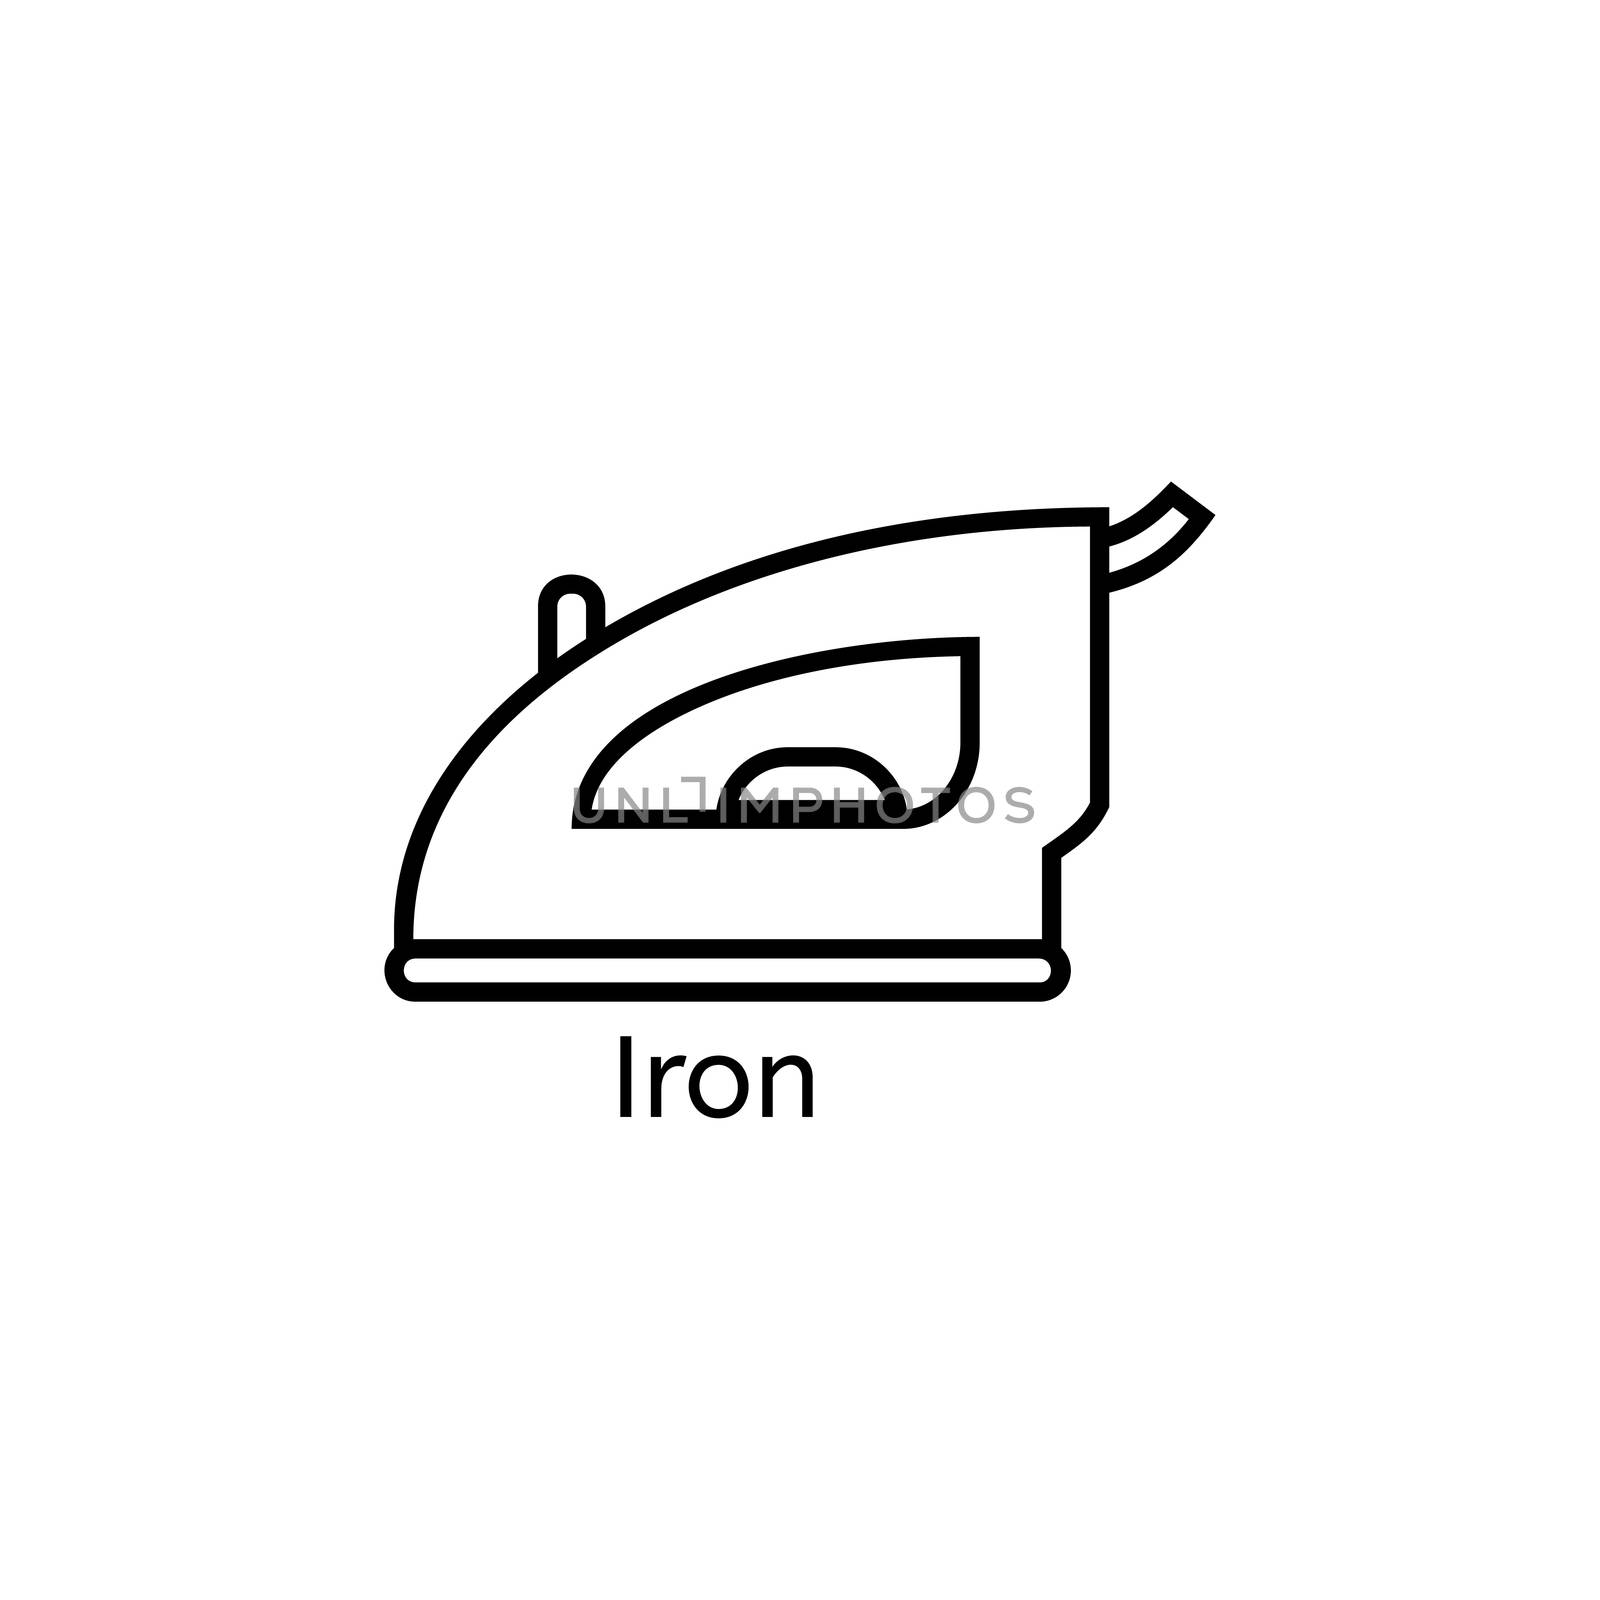 Iron simple line icon. Ironing clothes thin linear signs. Cleaning the house concept for websites, infographic, mobile applications. by Elena_Garder